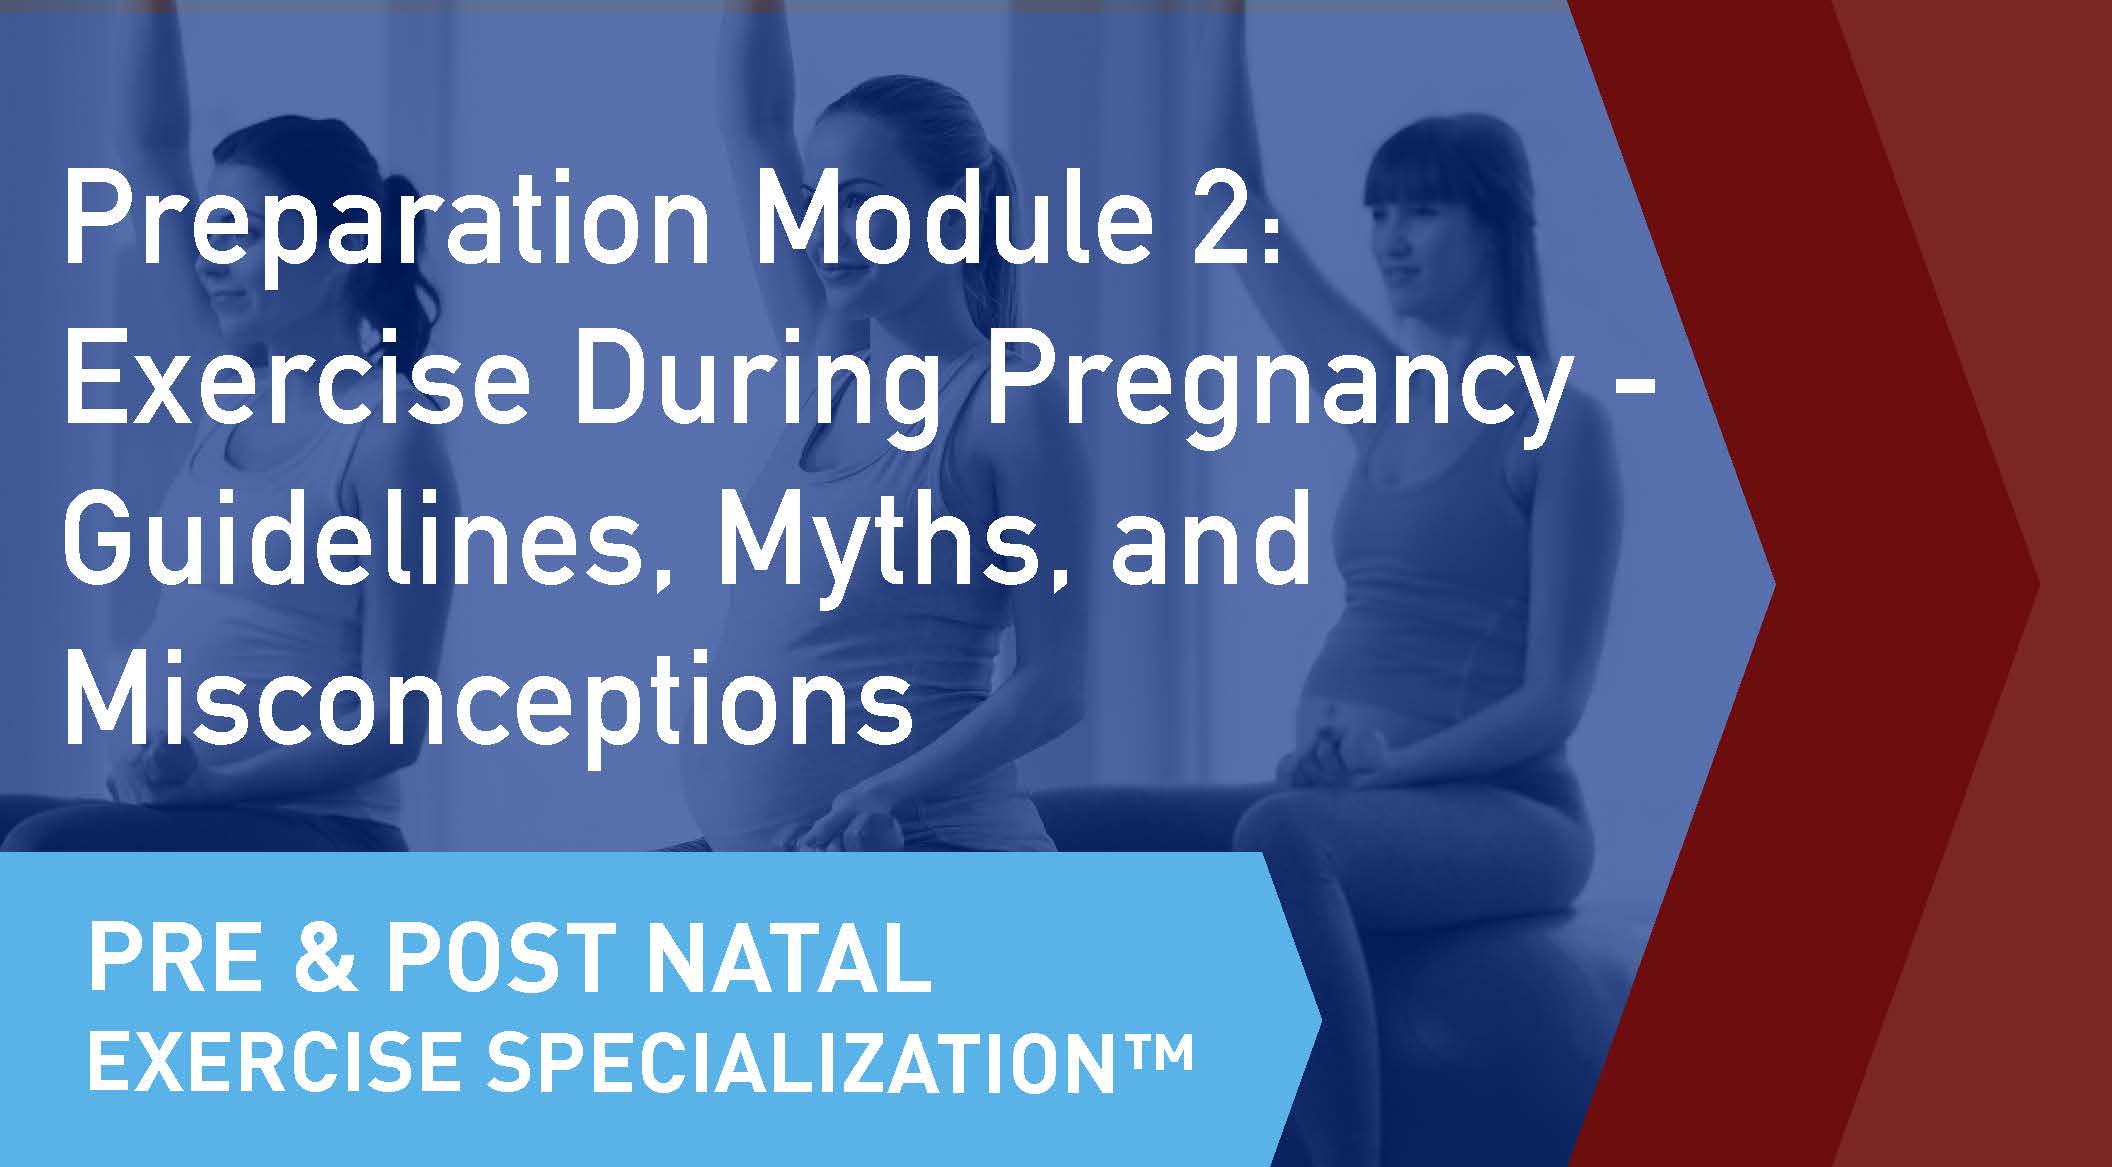 The online learning module cover of the CSEP Pre and Postnatal Exercise Specialization Preparation Module 2